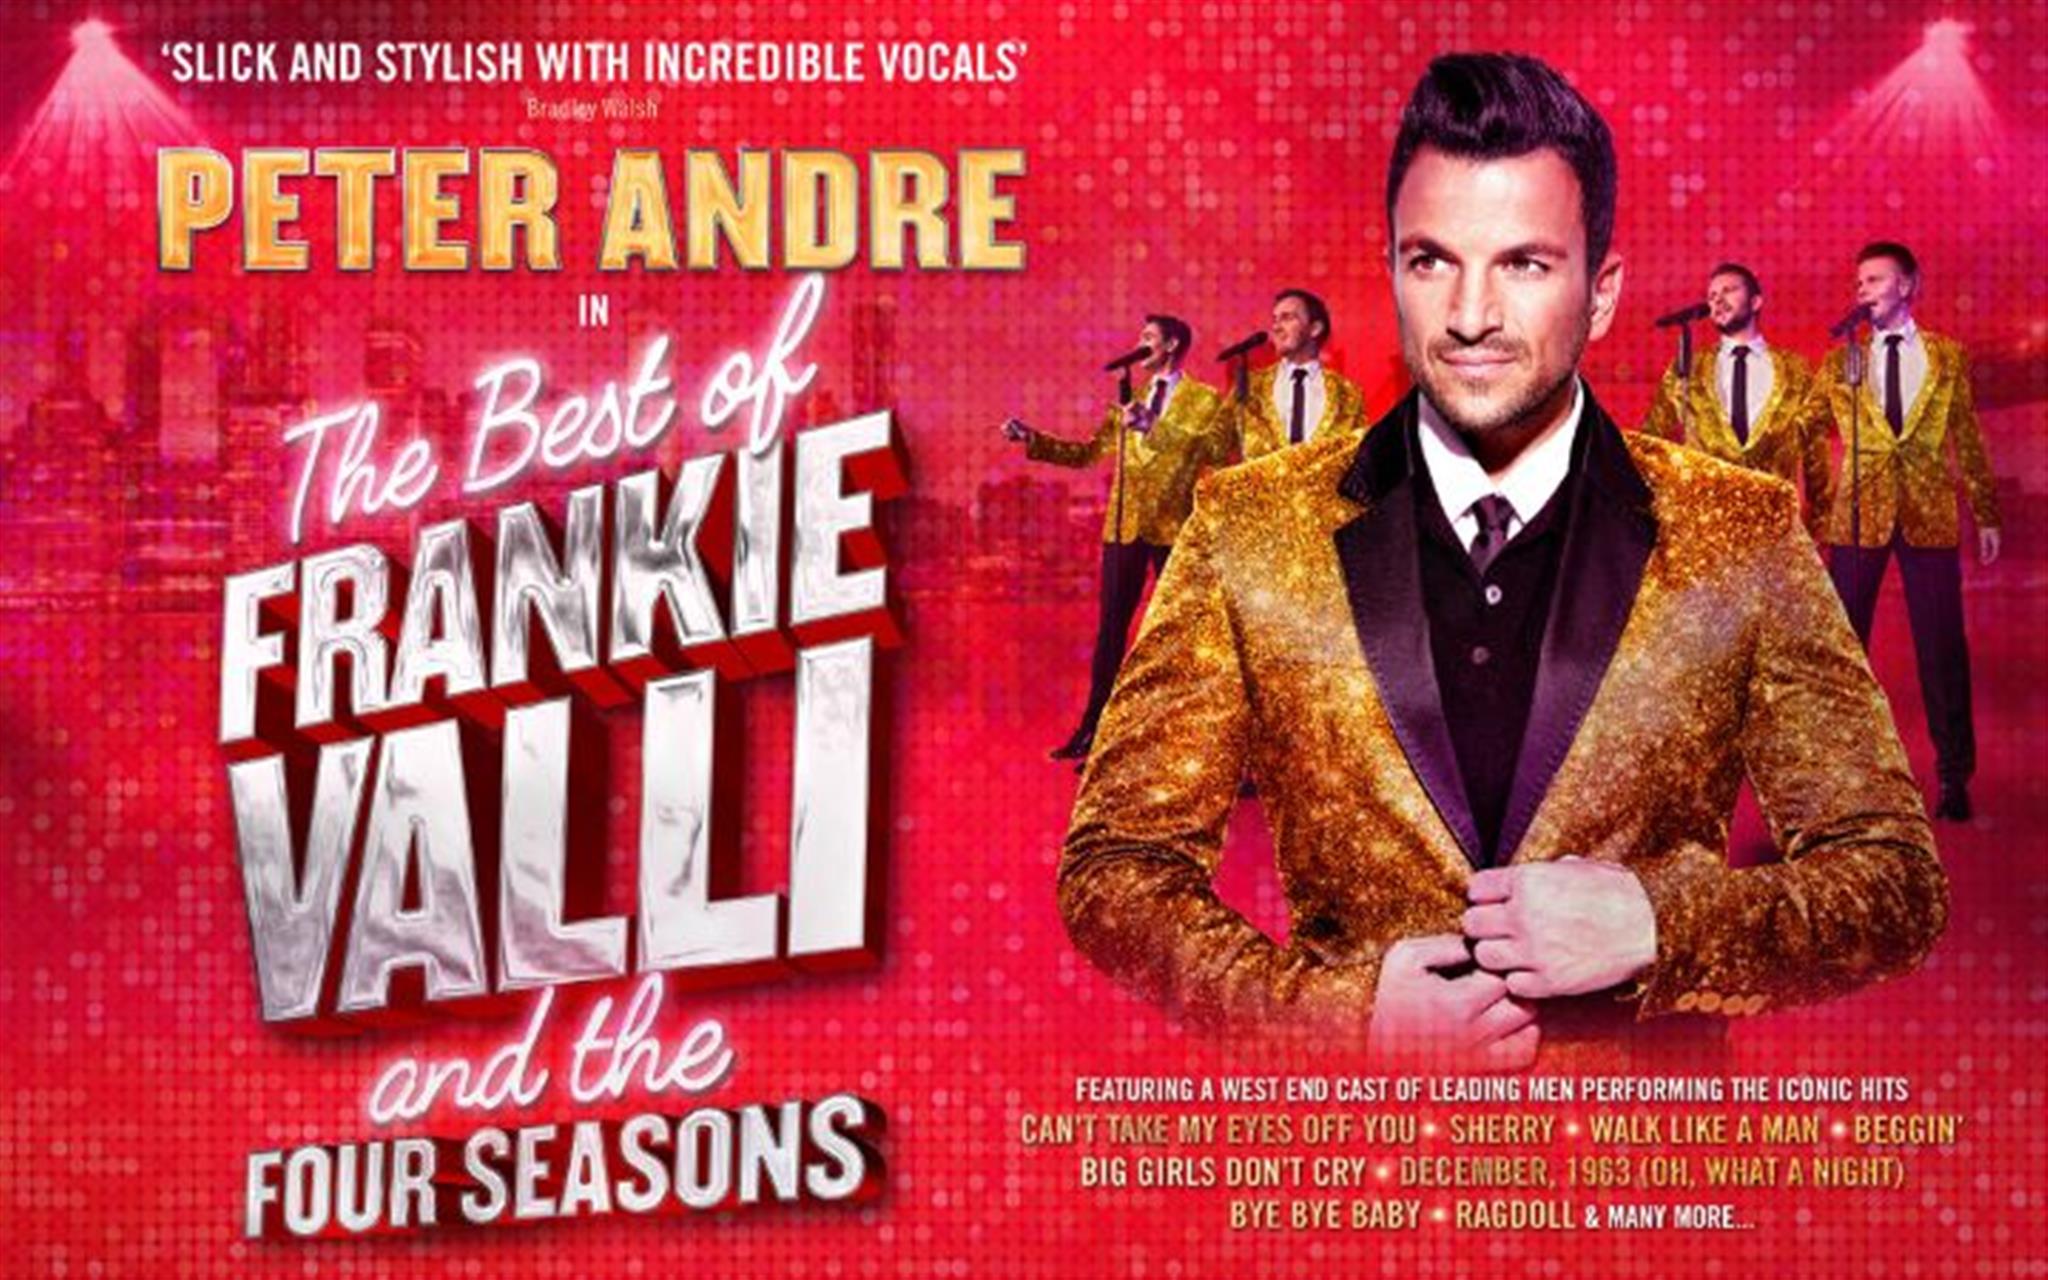 Peter Andre: The Best of Frankie Valli and the Four Seasons image